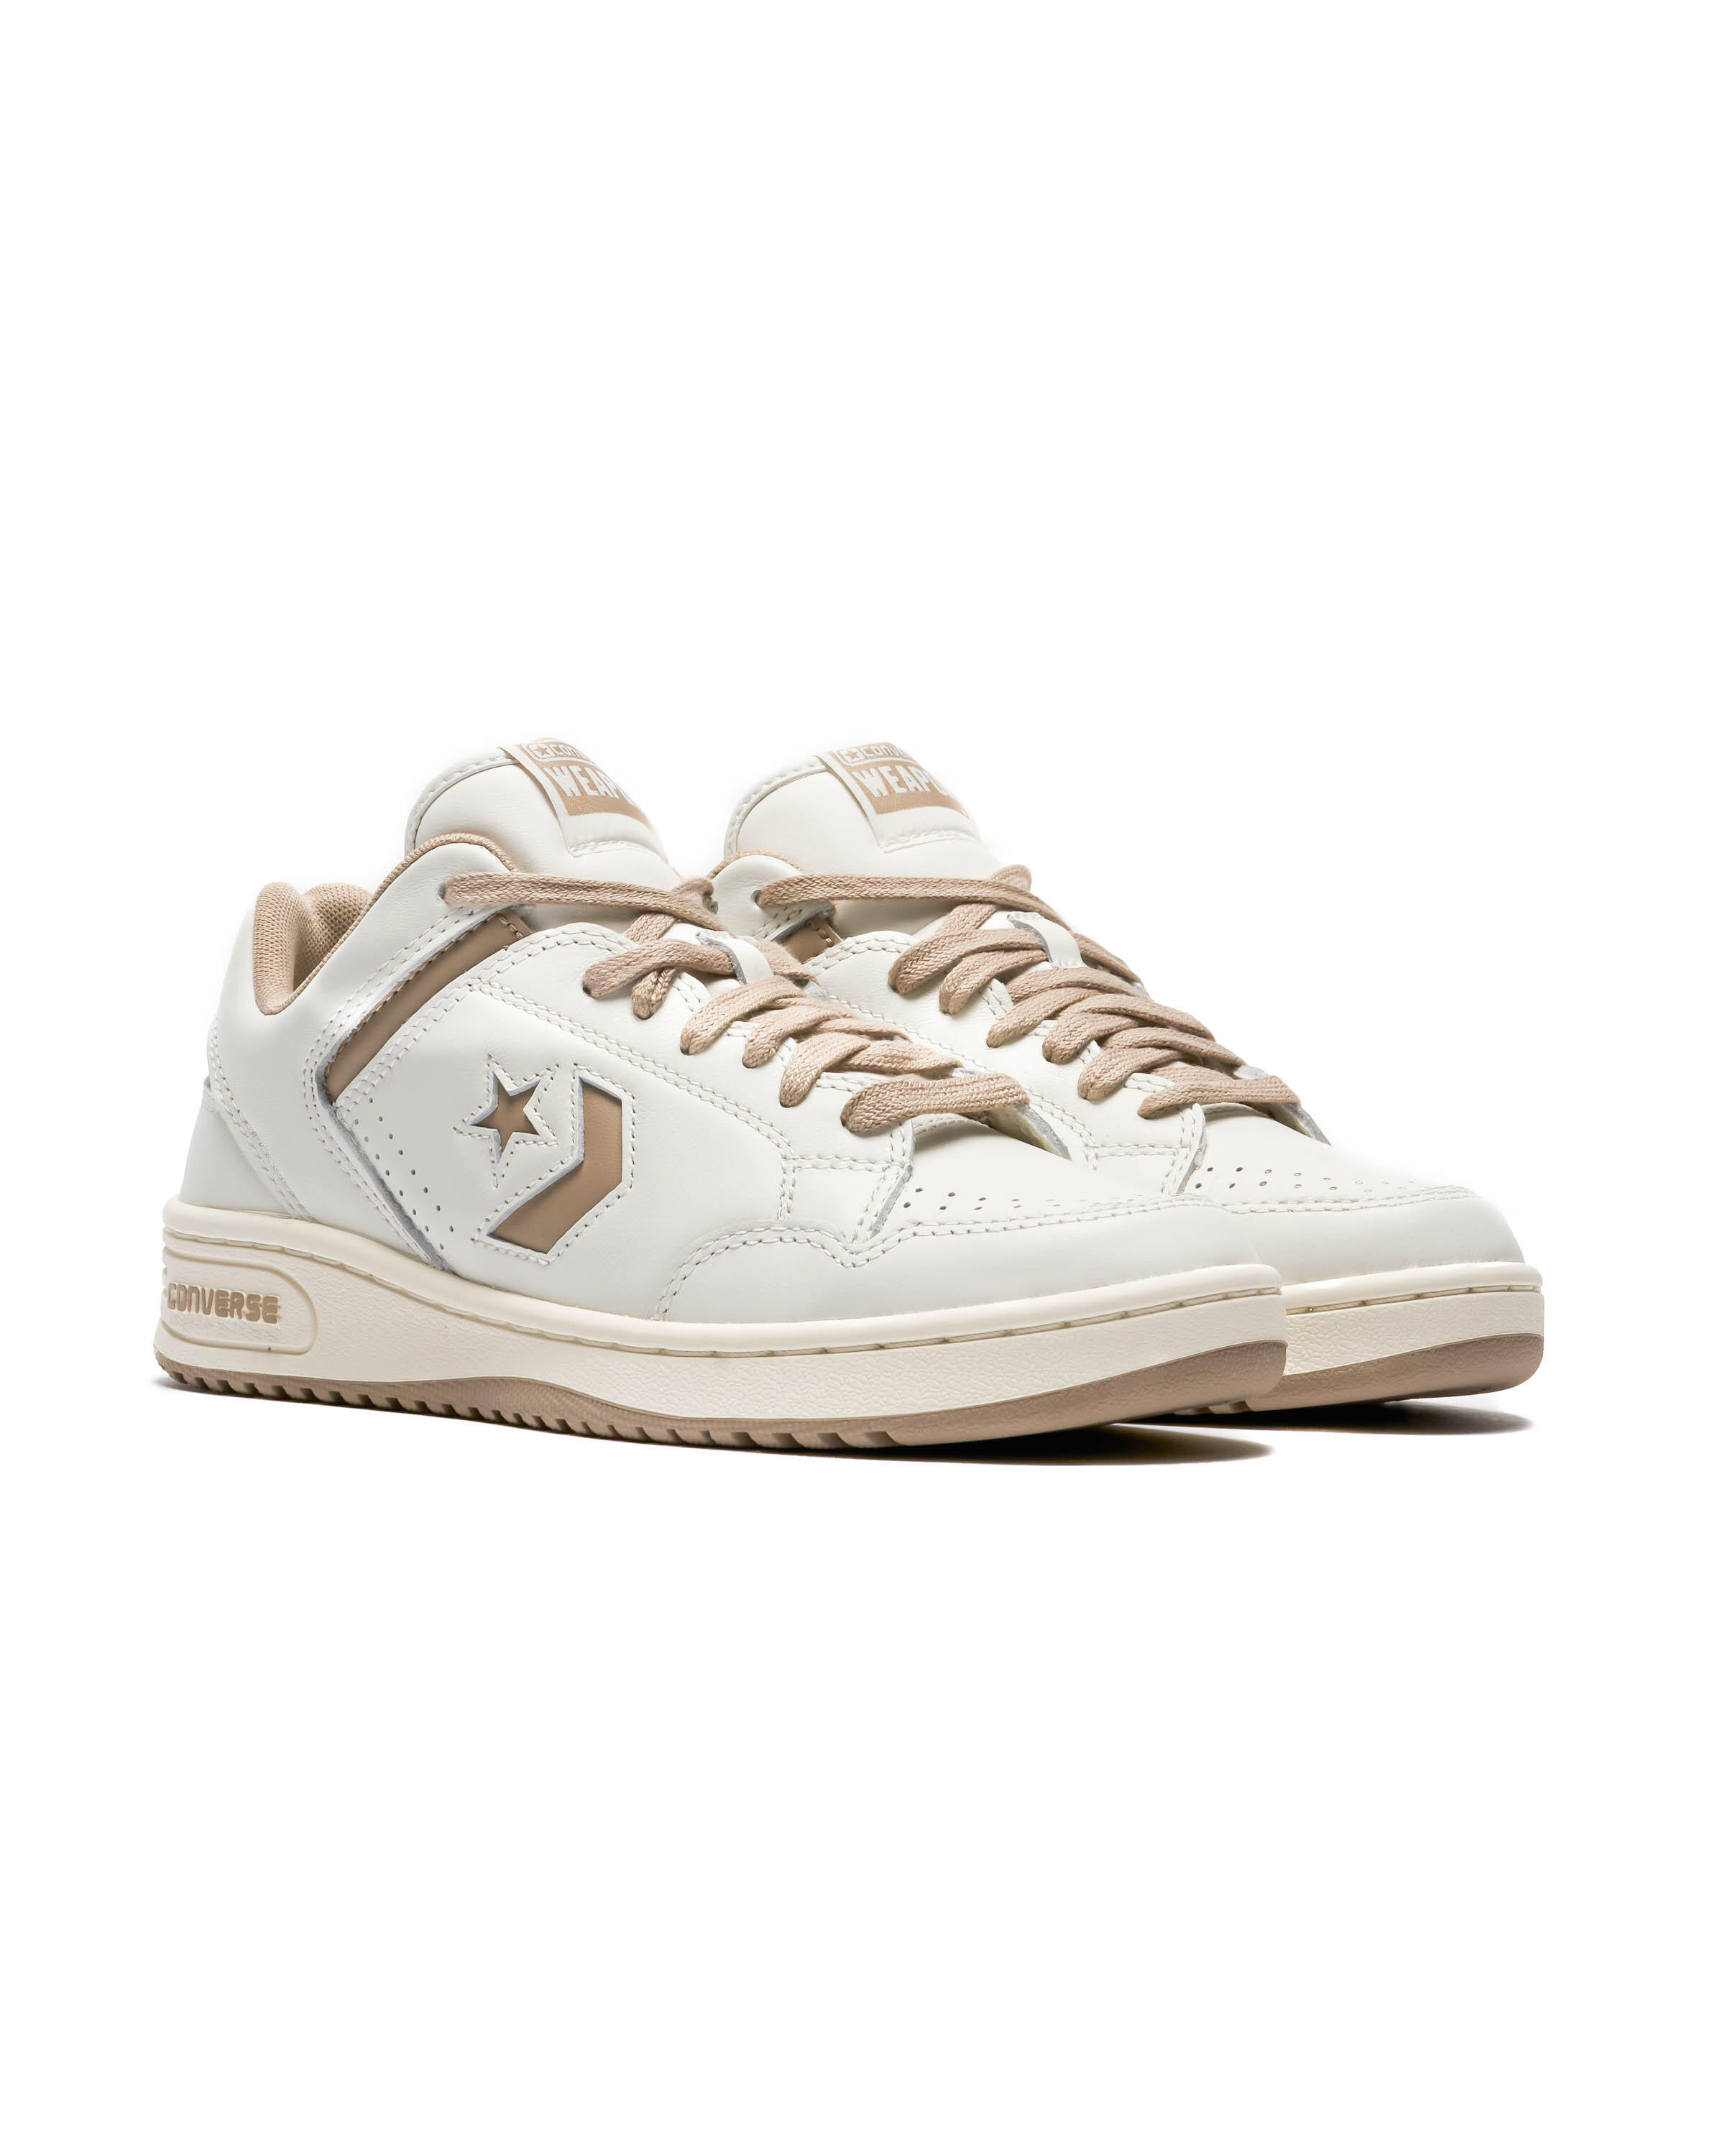 Converse x OLD MONEY WEAPON OX